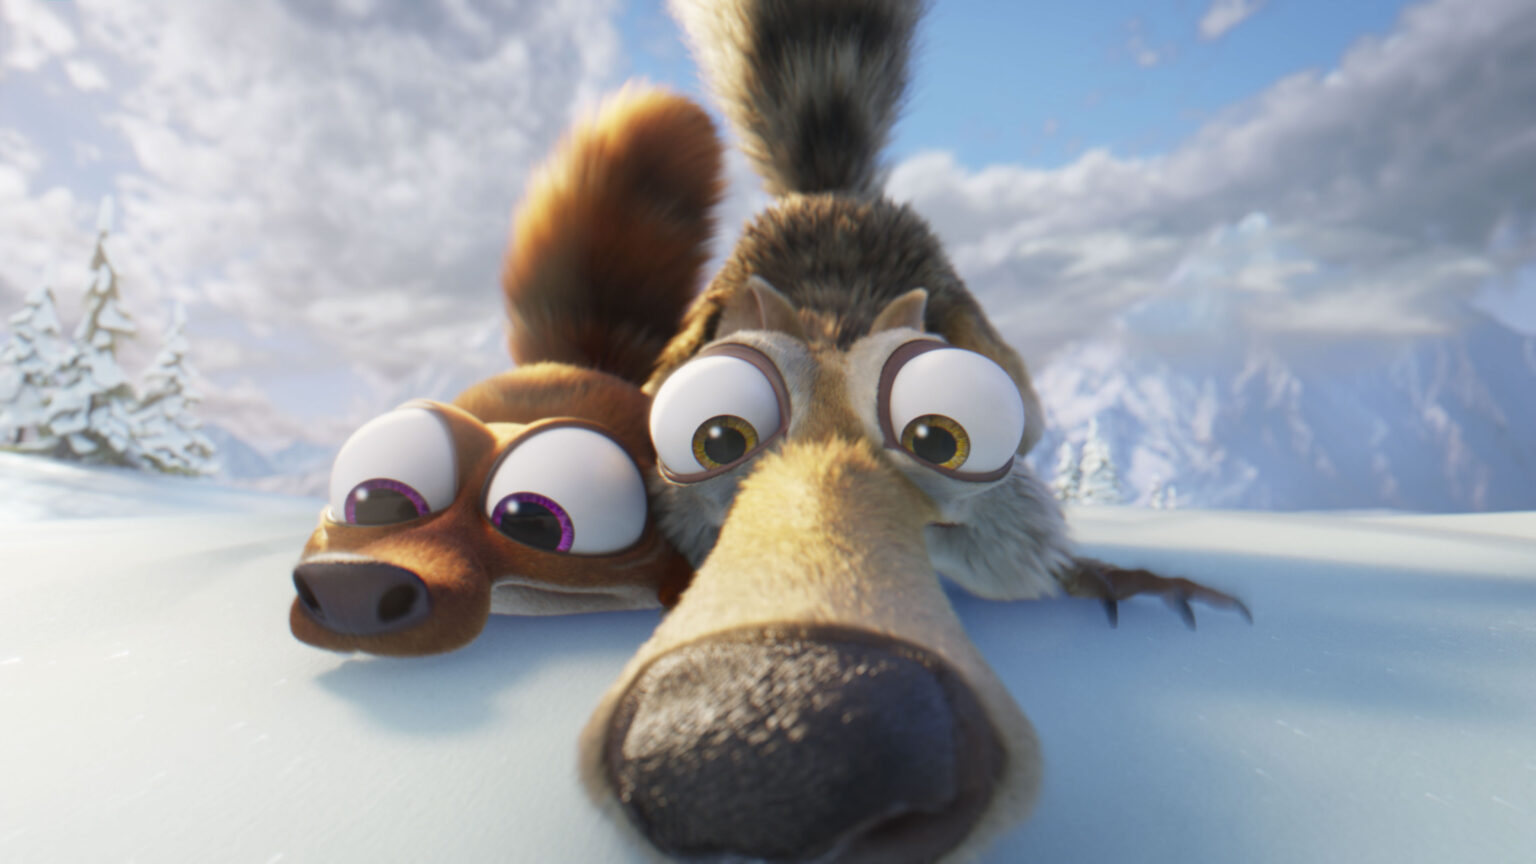 Ice Age: Scrat Tales” Coming Soon To Disney+